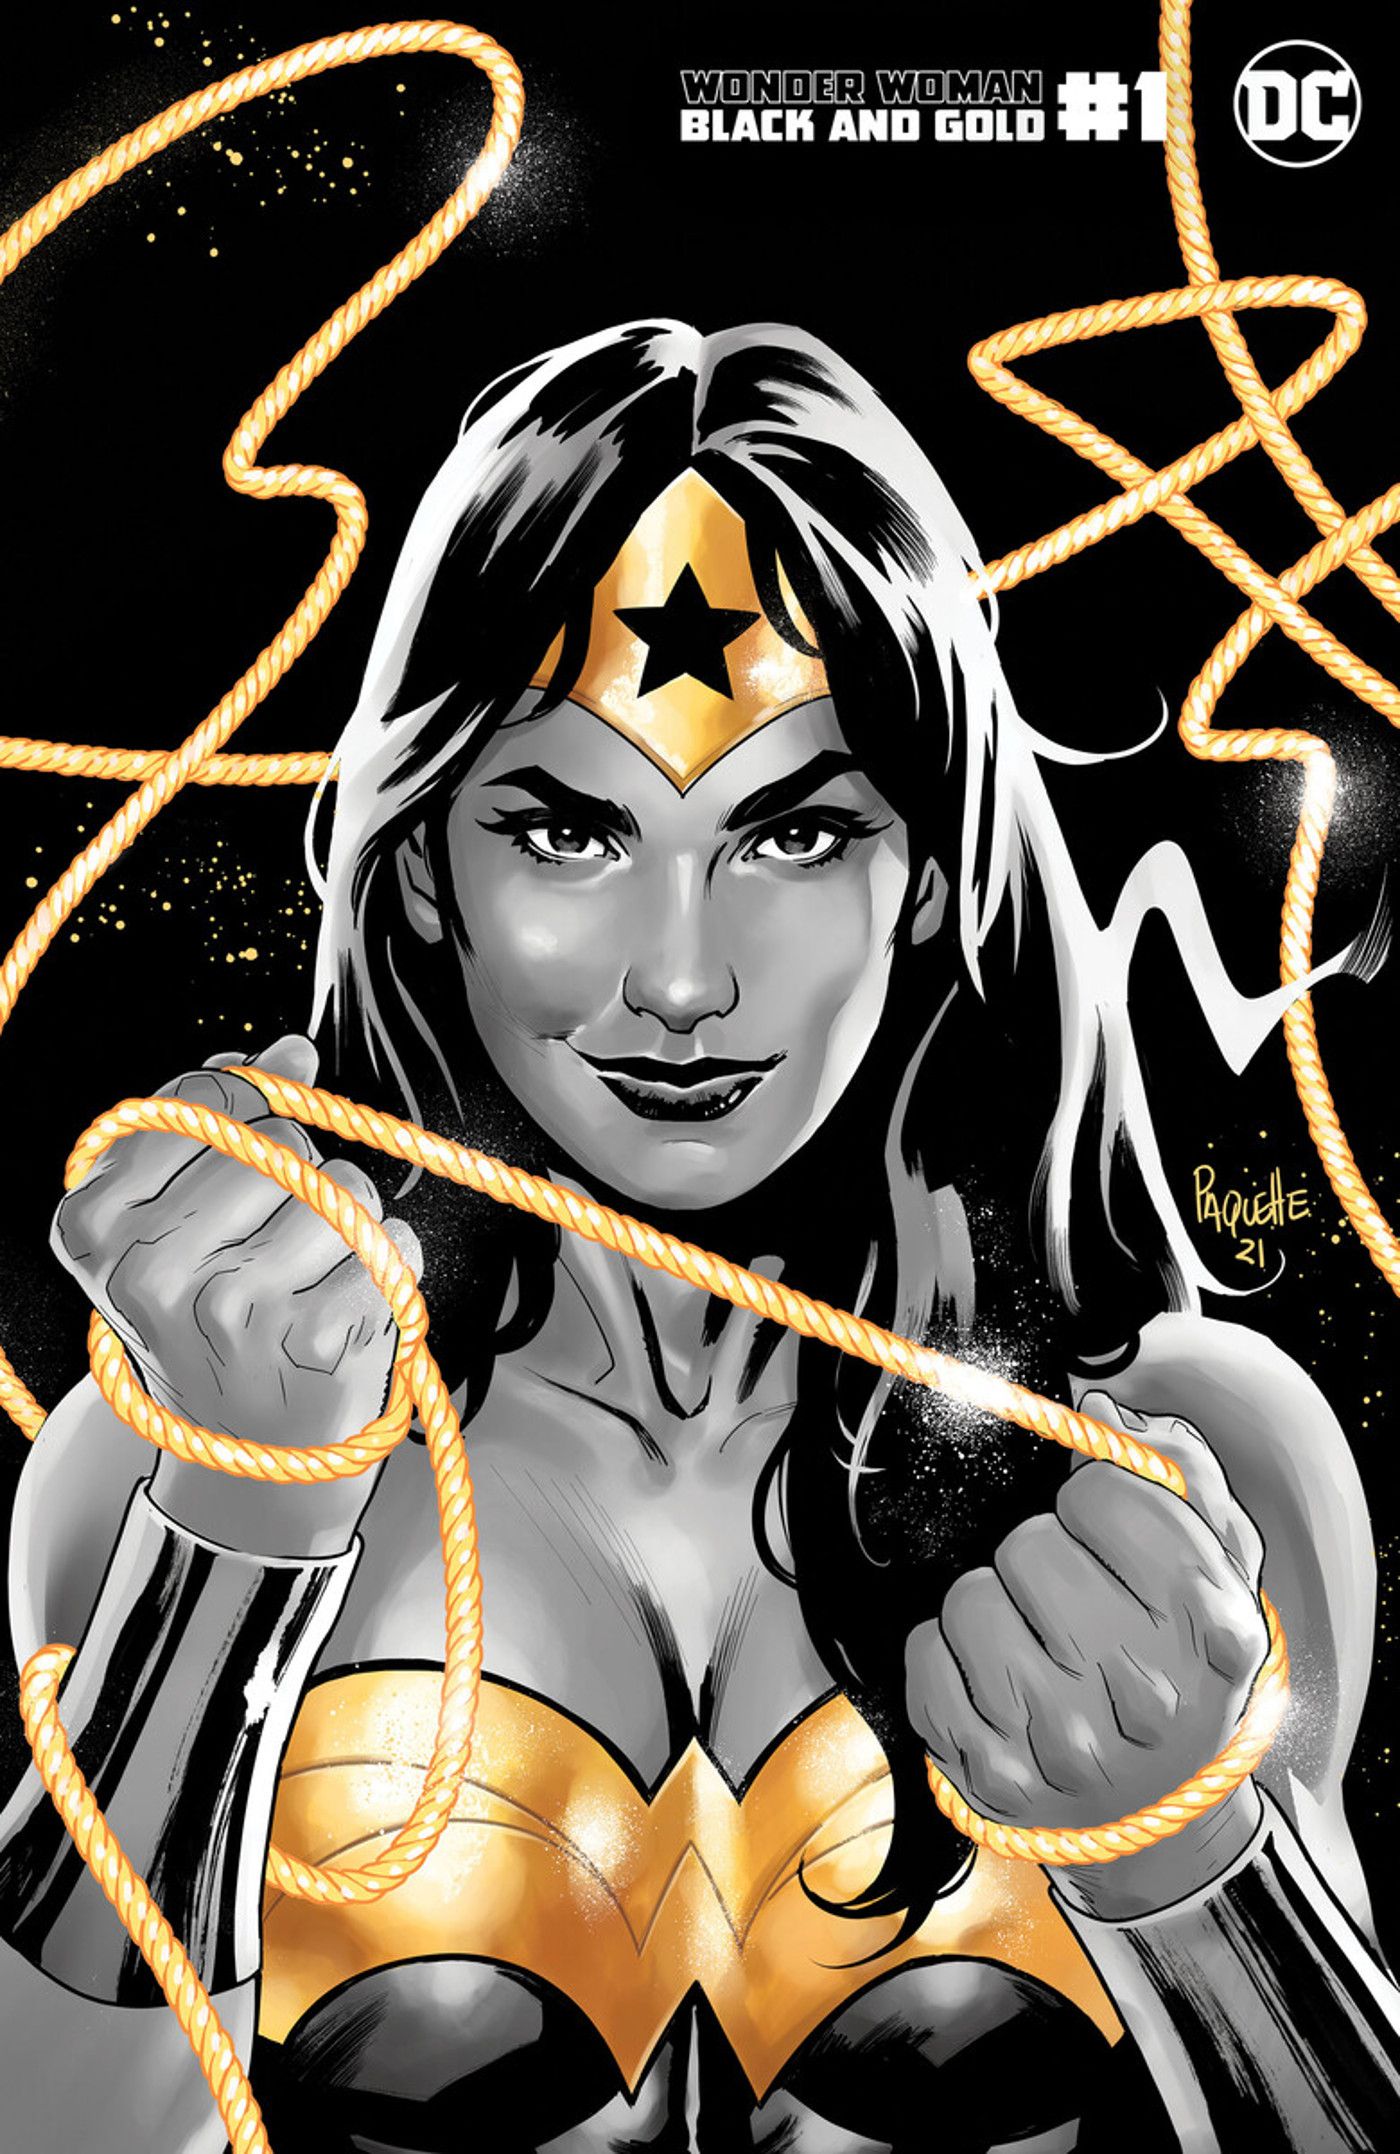 Wonder Woman Black And Gold #1 Yanick Paquette cover